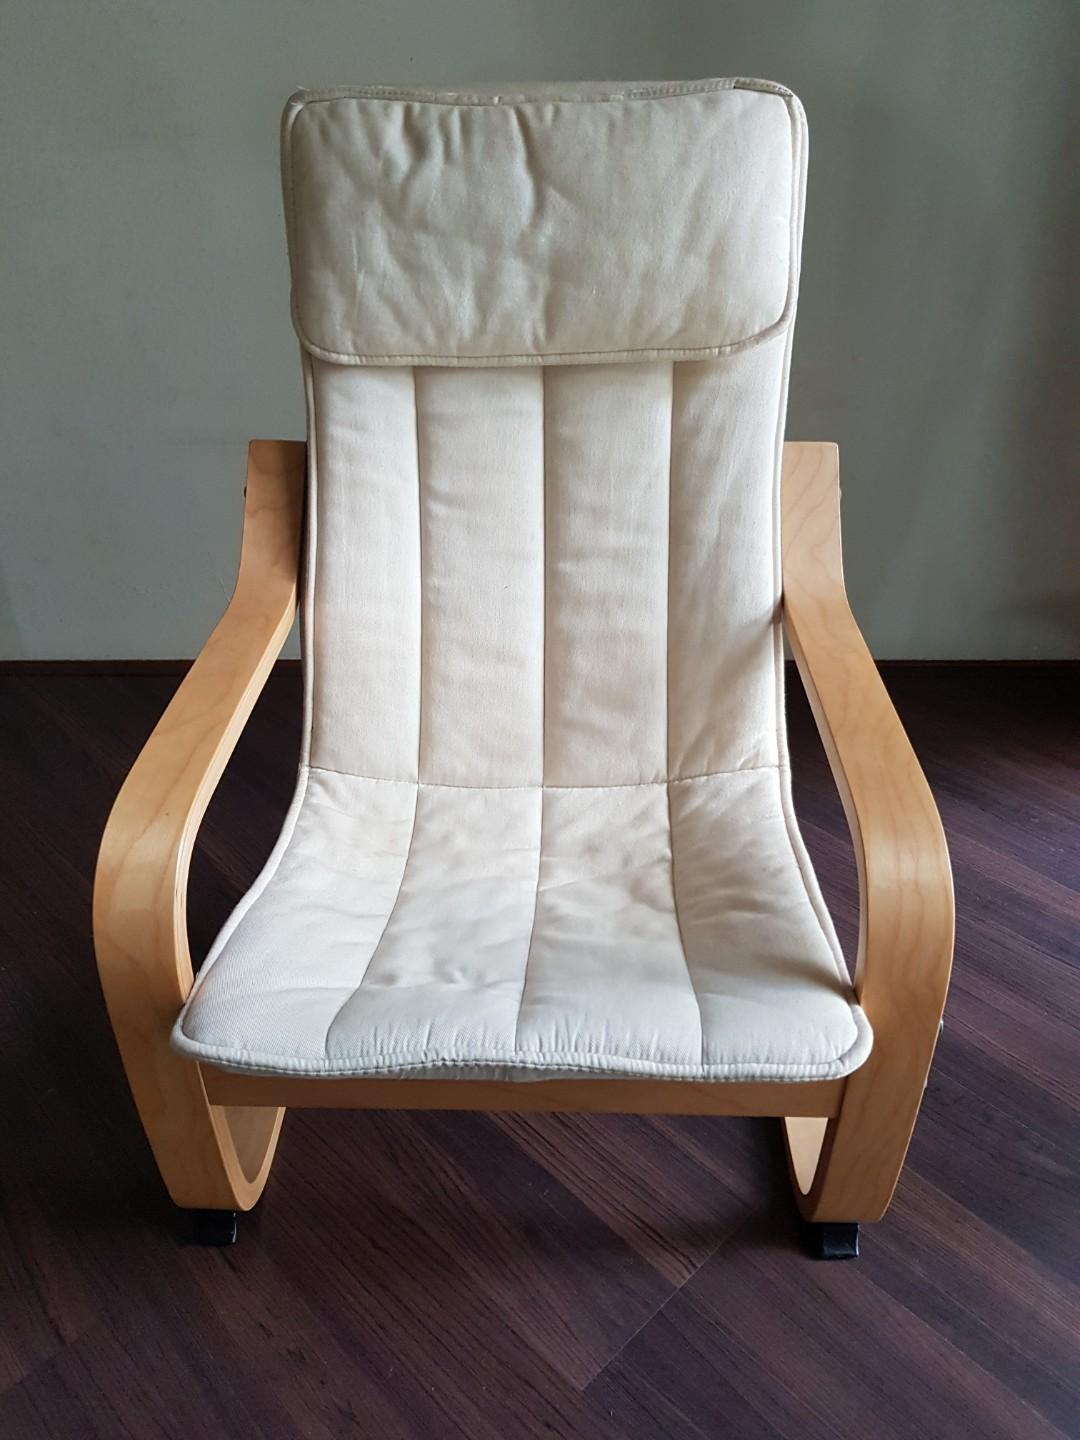 Ikea Kid S Rocking Chair Furniture Tables Chairs On Carousell